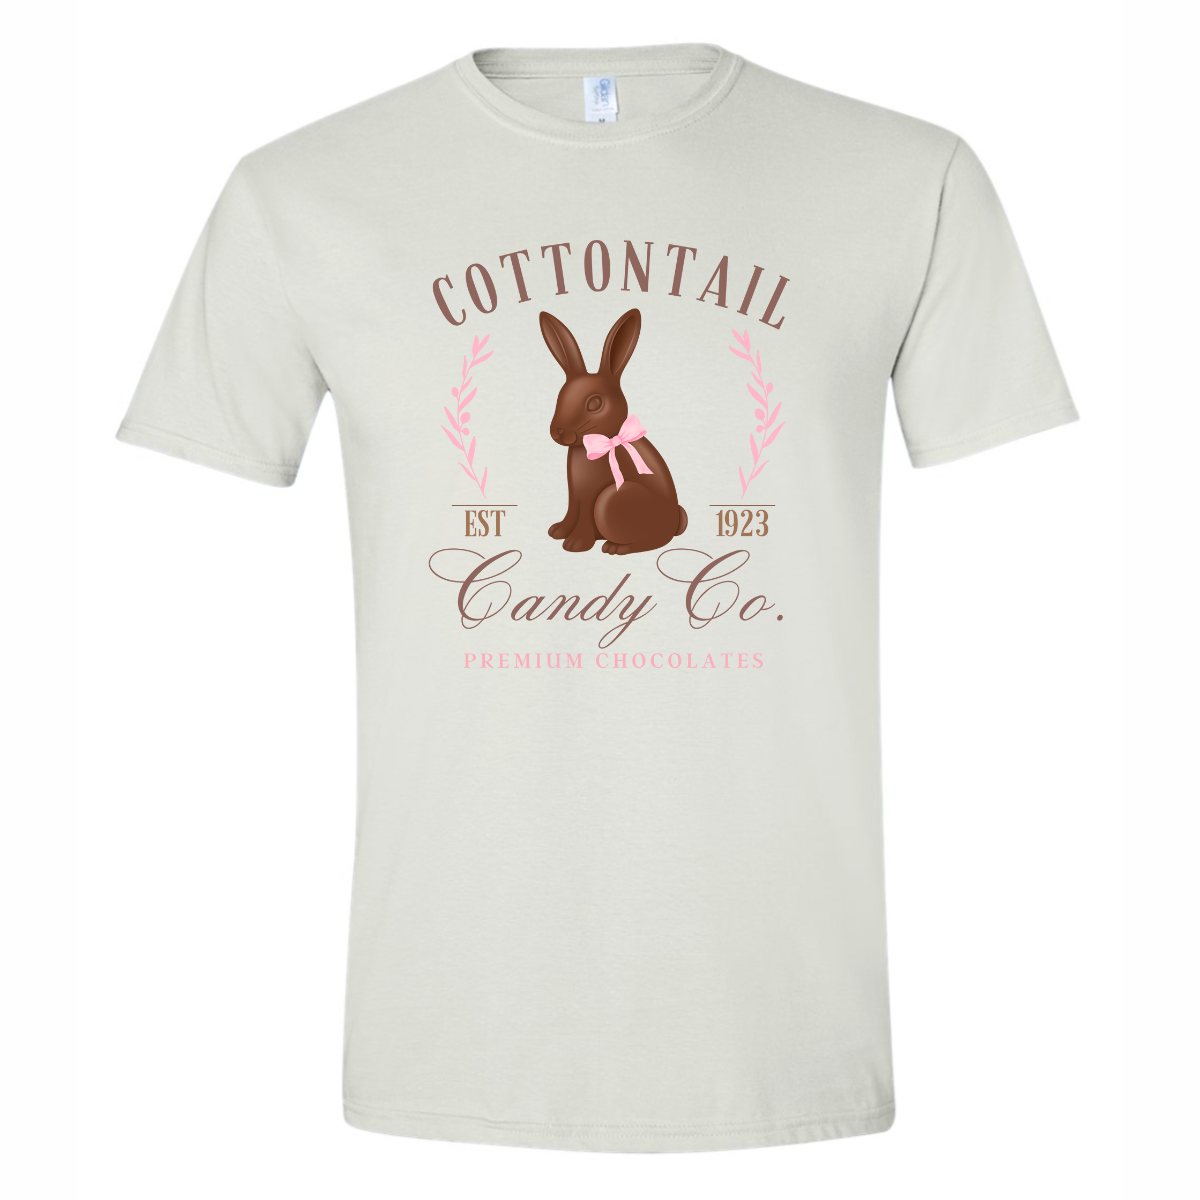 Cottontail Candy Company